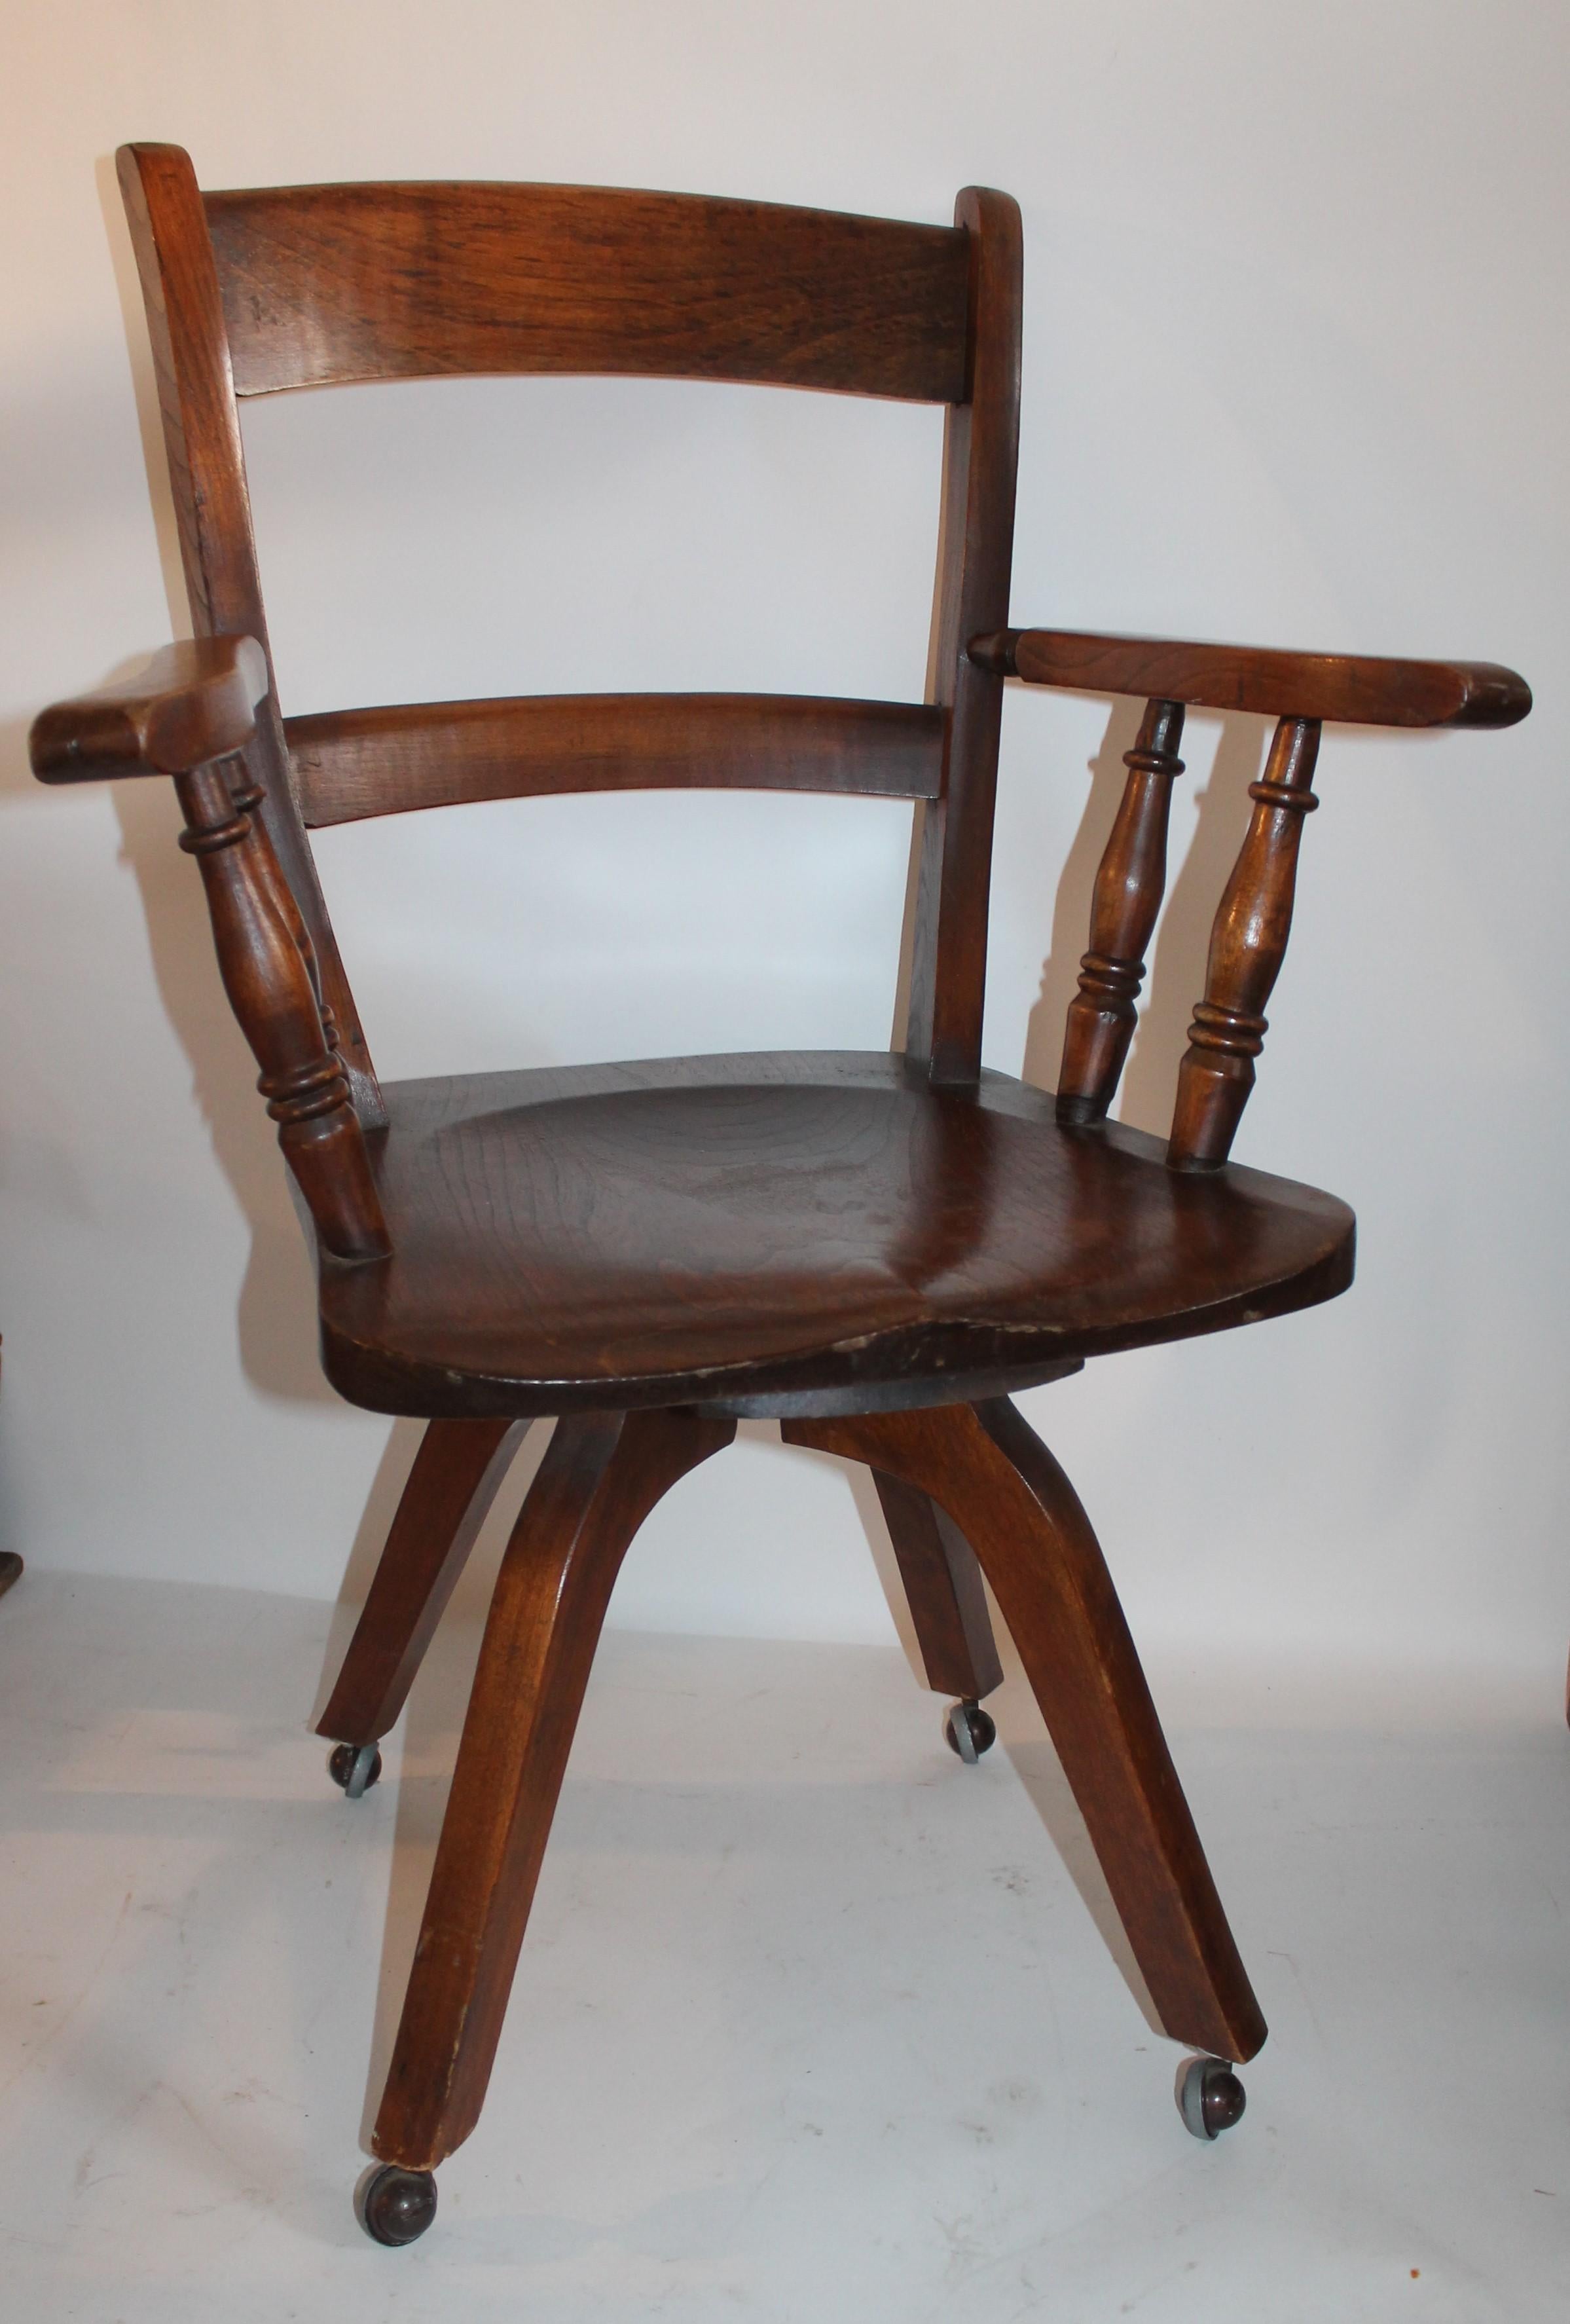 This fine swivel walnut office chair is on wheels and in pristine condition. The wheels are new and in great working order.